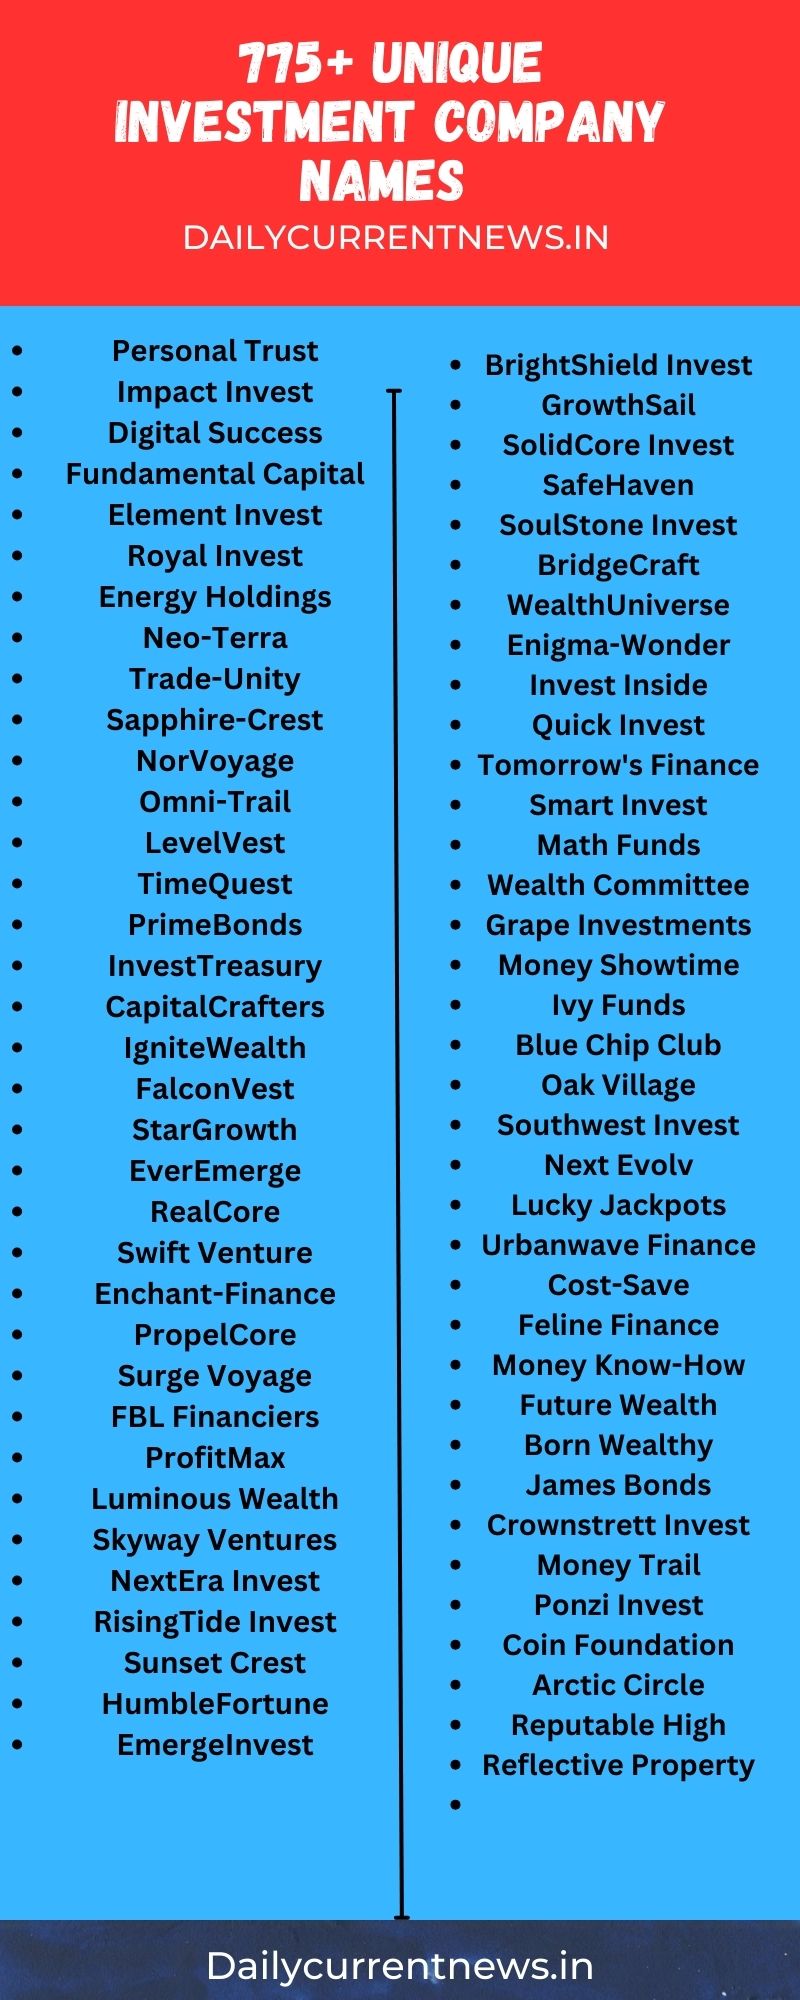 Investment Company Names List